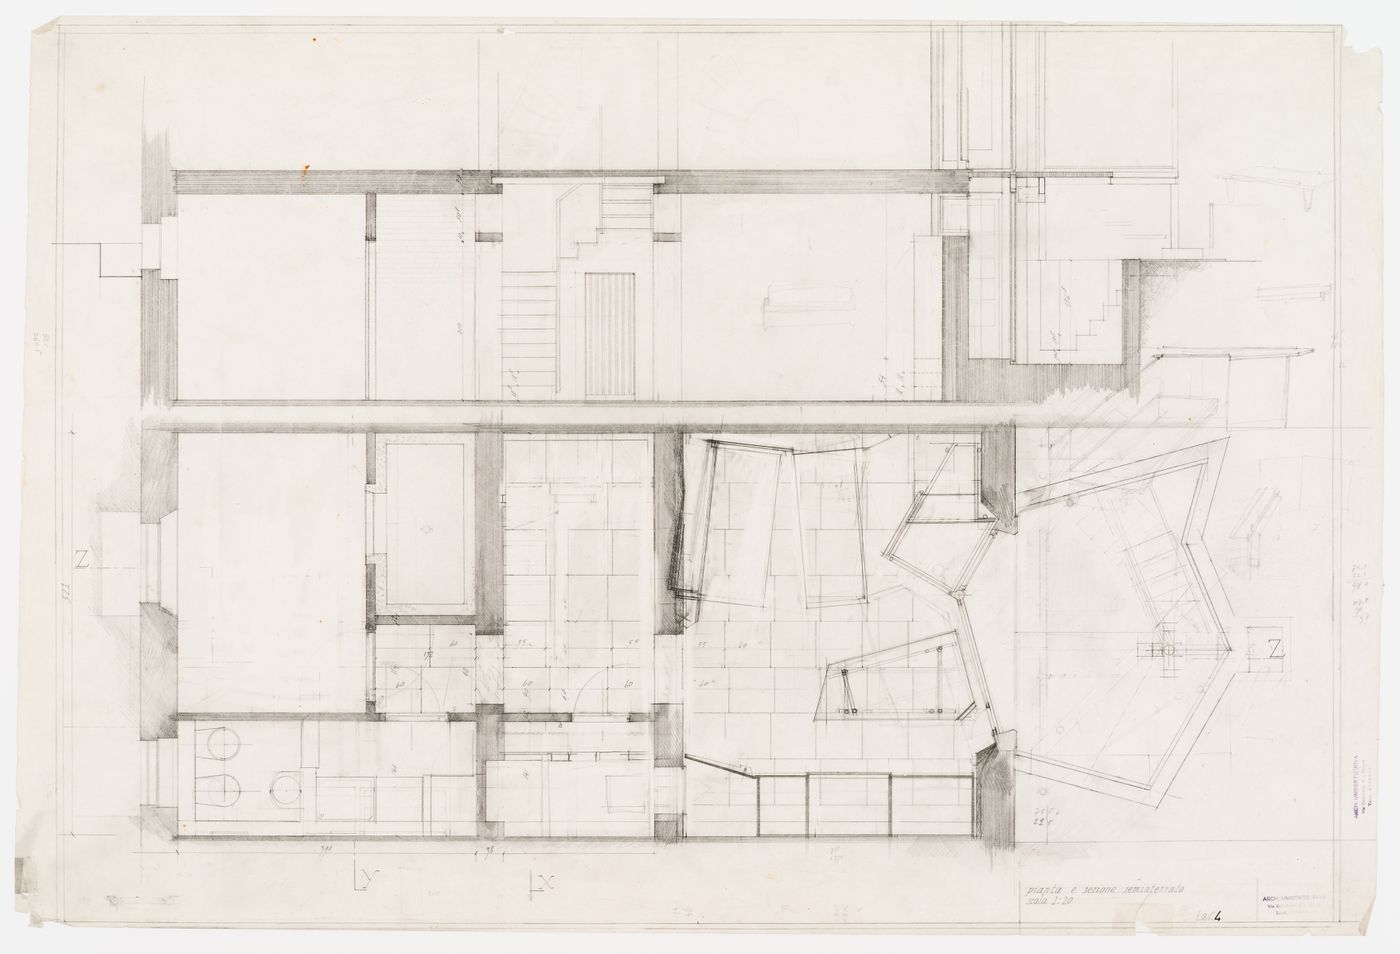 Plan and section of the basement for Casa Frea, Milan, Italy